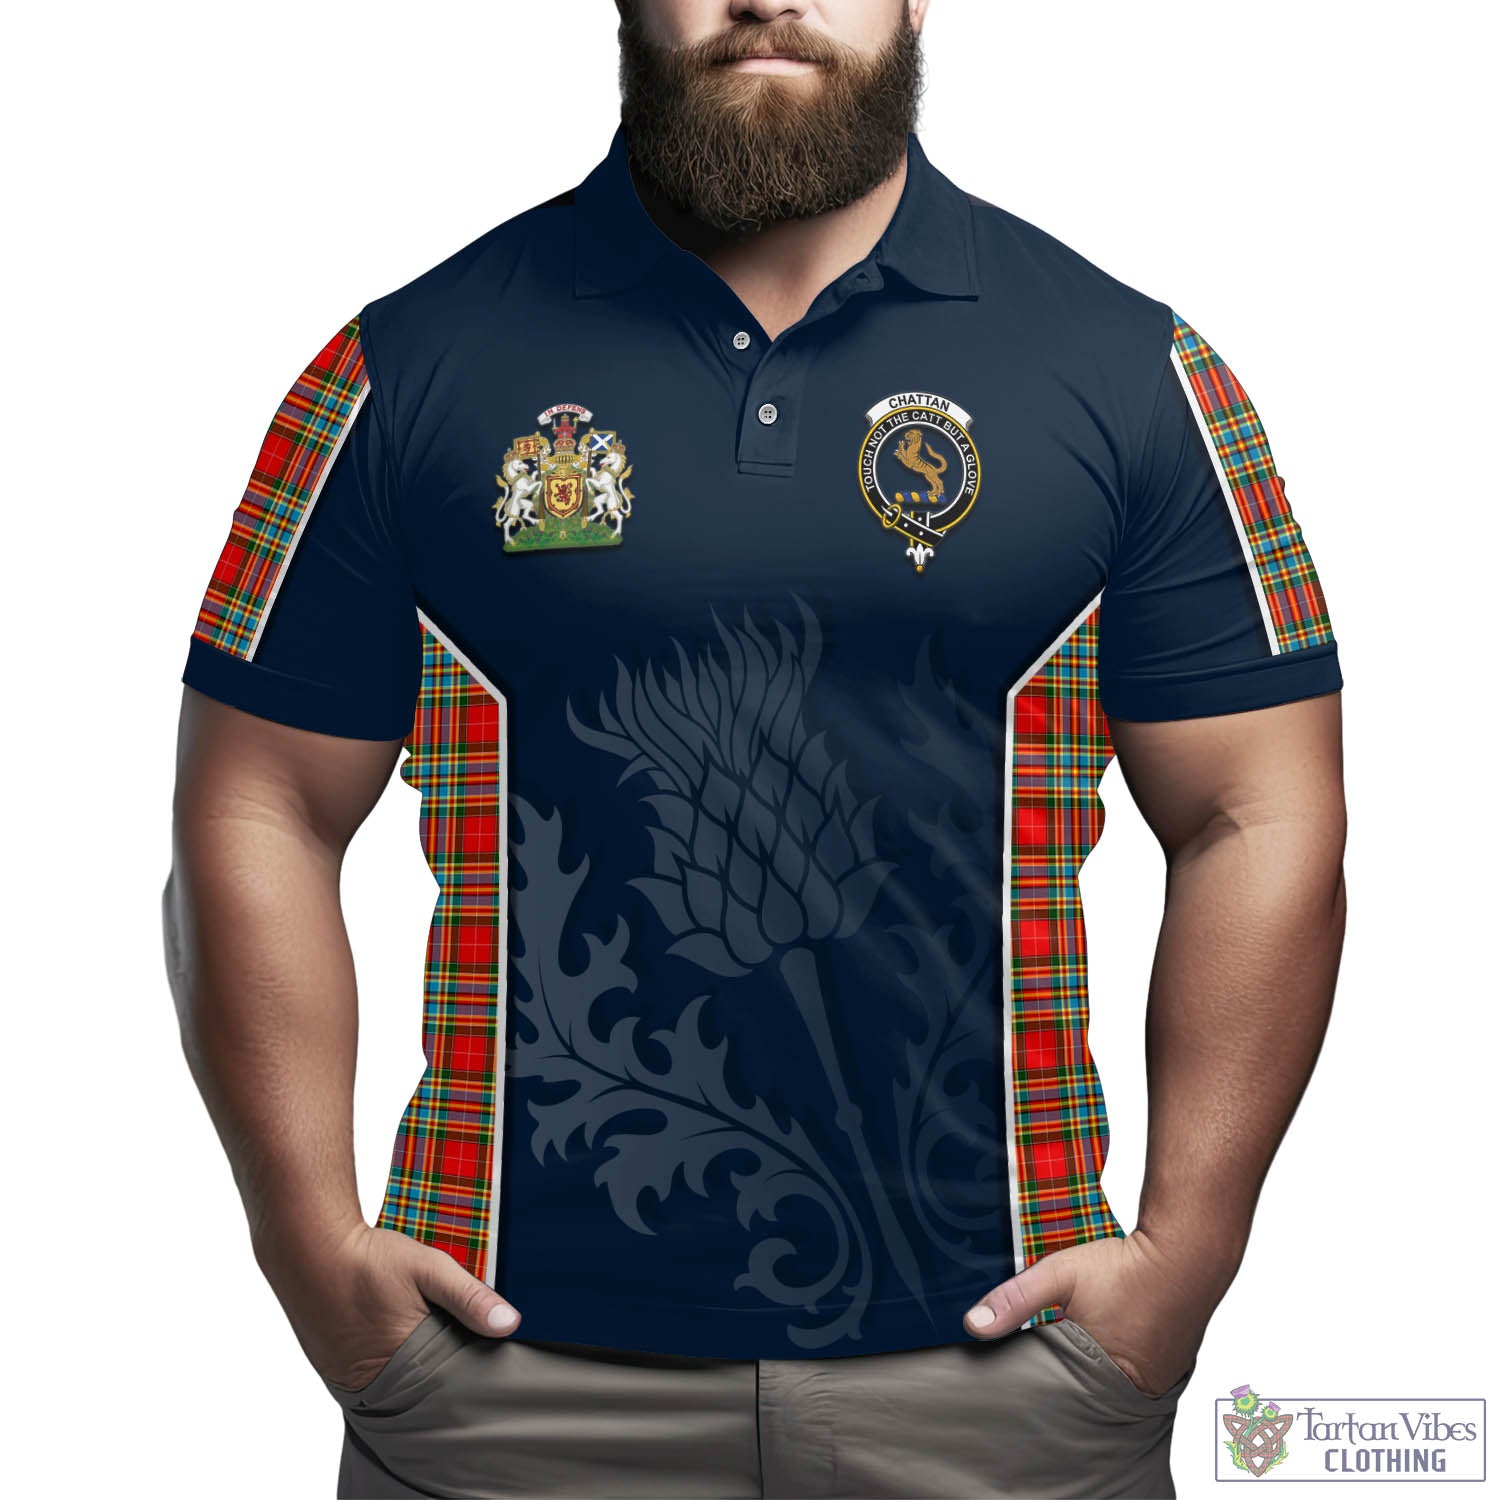 Tartan Vibes Clothing Chattan Tartan Men's Polo Shirt with Family Crest and Scottish Thistle Vibes Sport Style